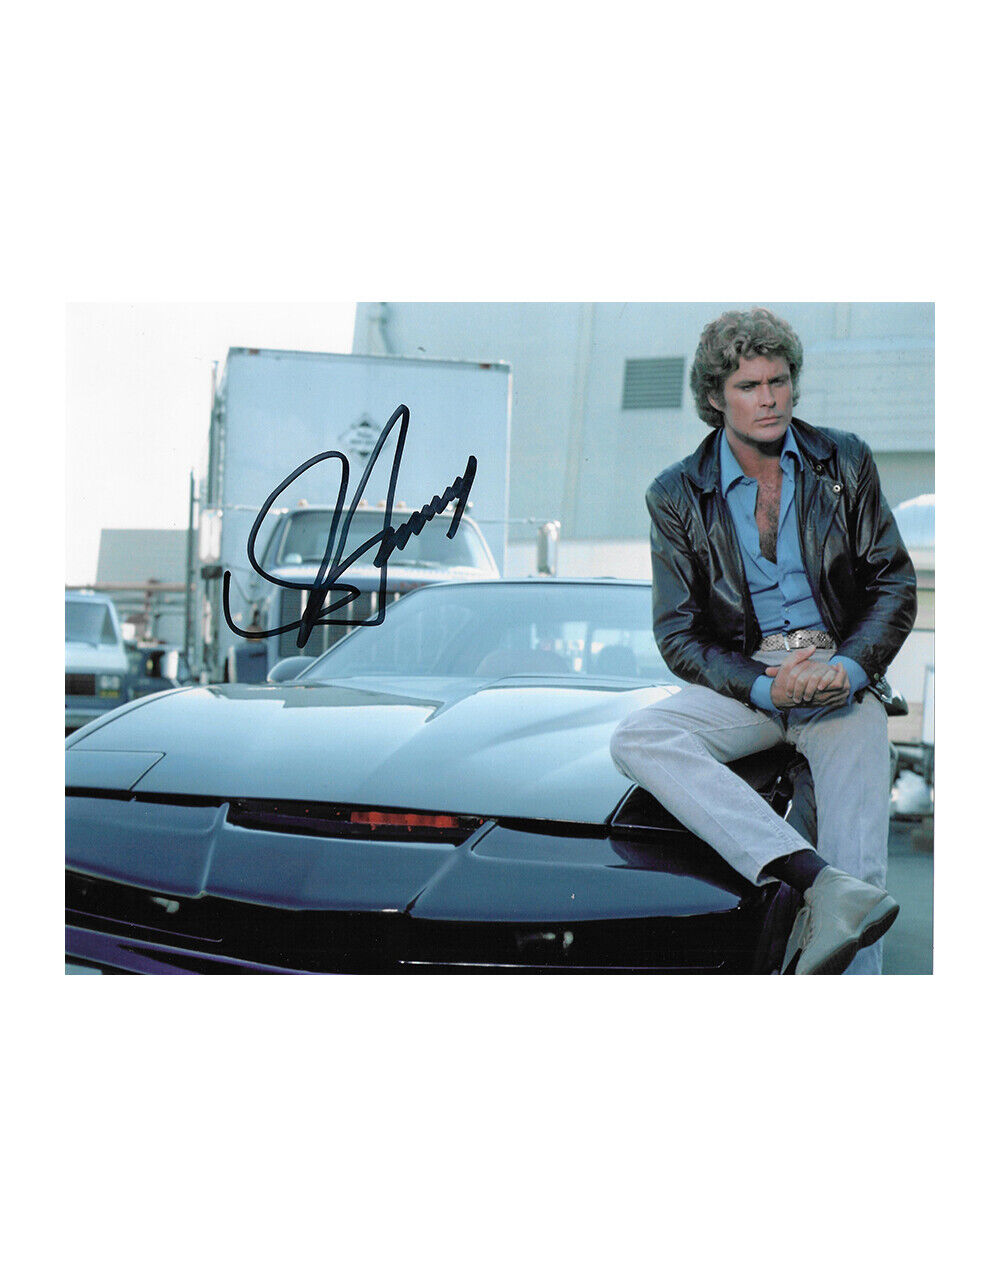 10x8 Knight Rider Print Signed by David Hasselhoff 100% Authentic With COA